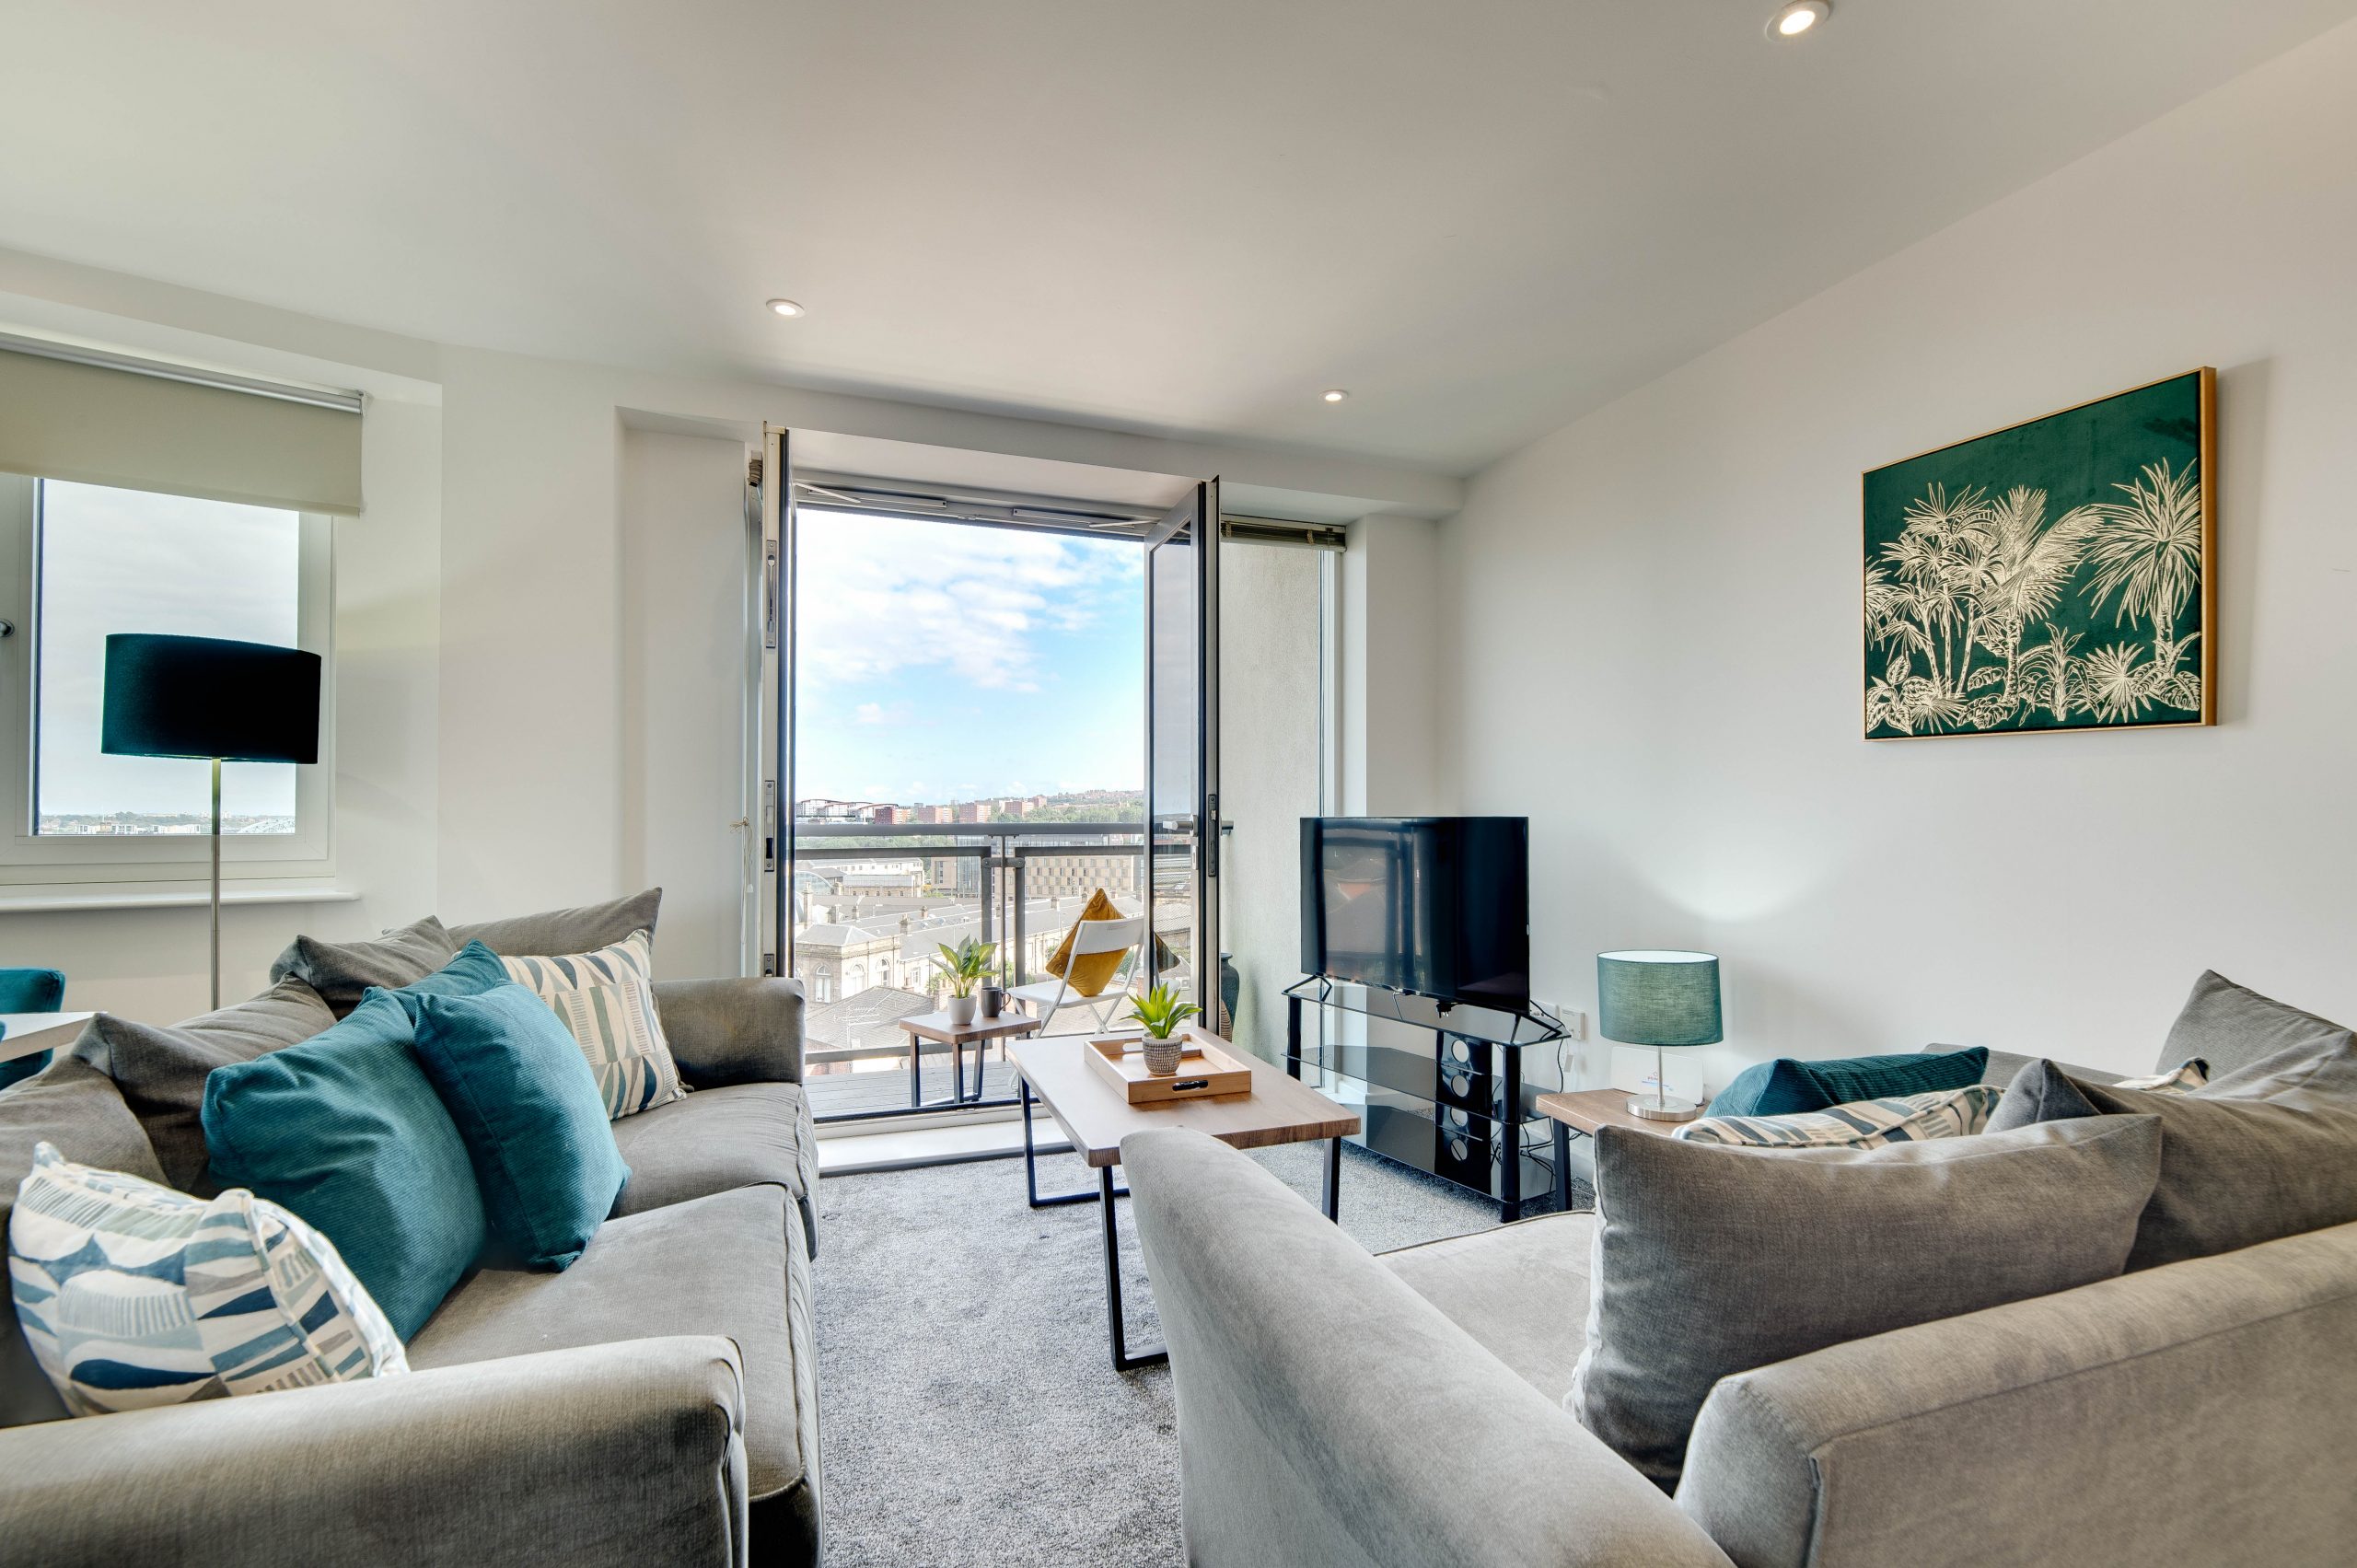 Week2Week Serviced Accommodation Provider Expands in Newcastle